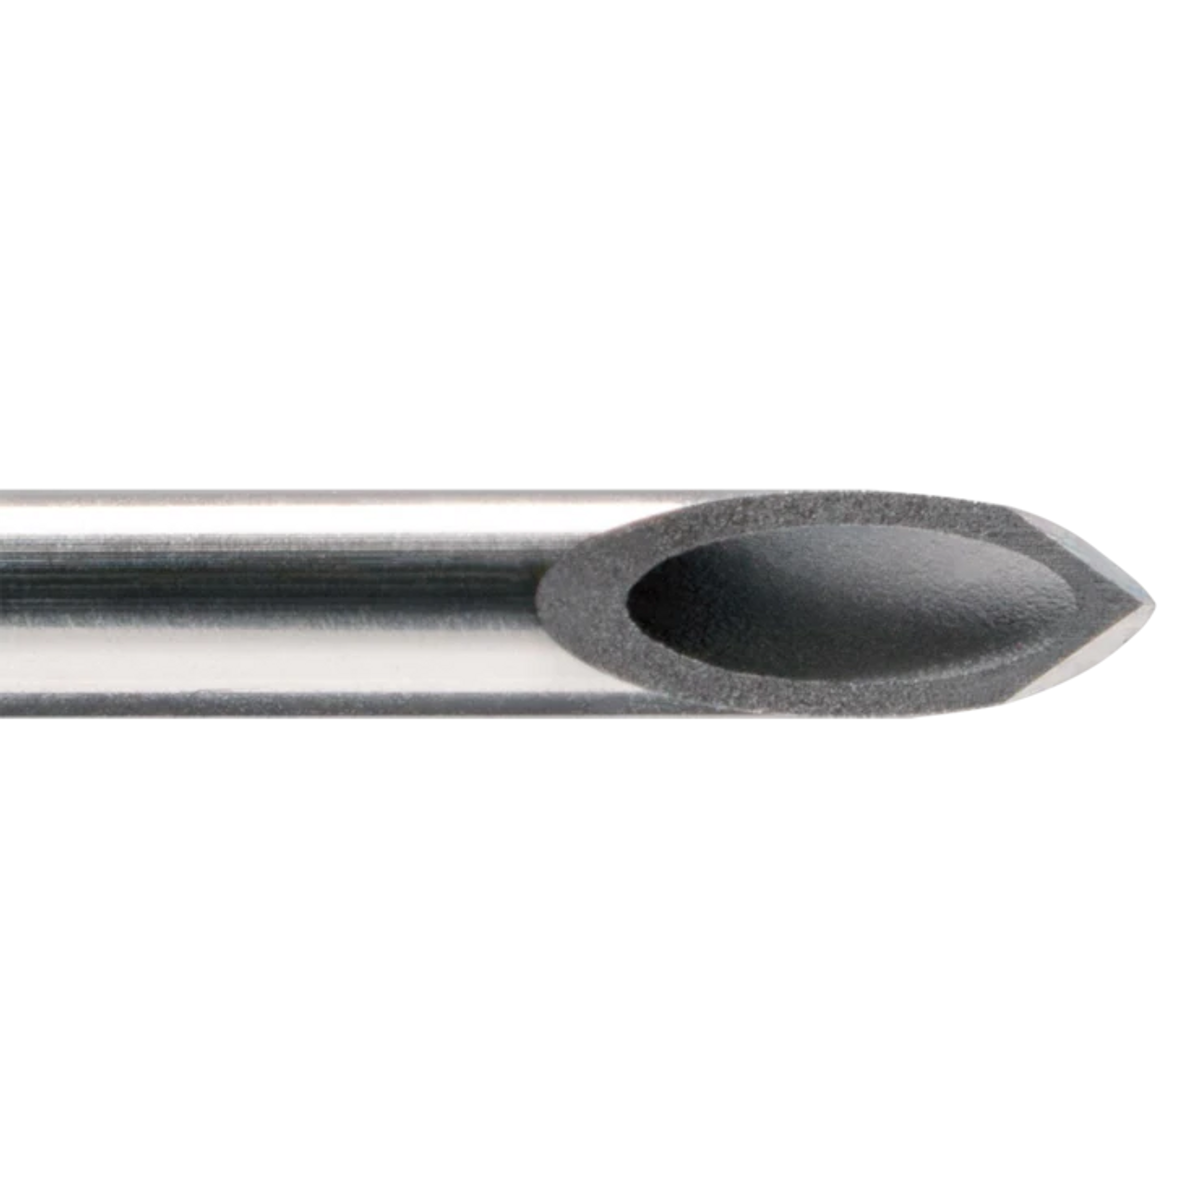 BD Whitacre Pencil Point Spinal Needles